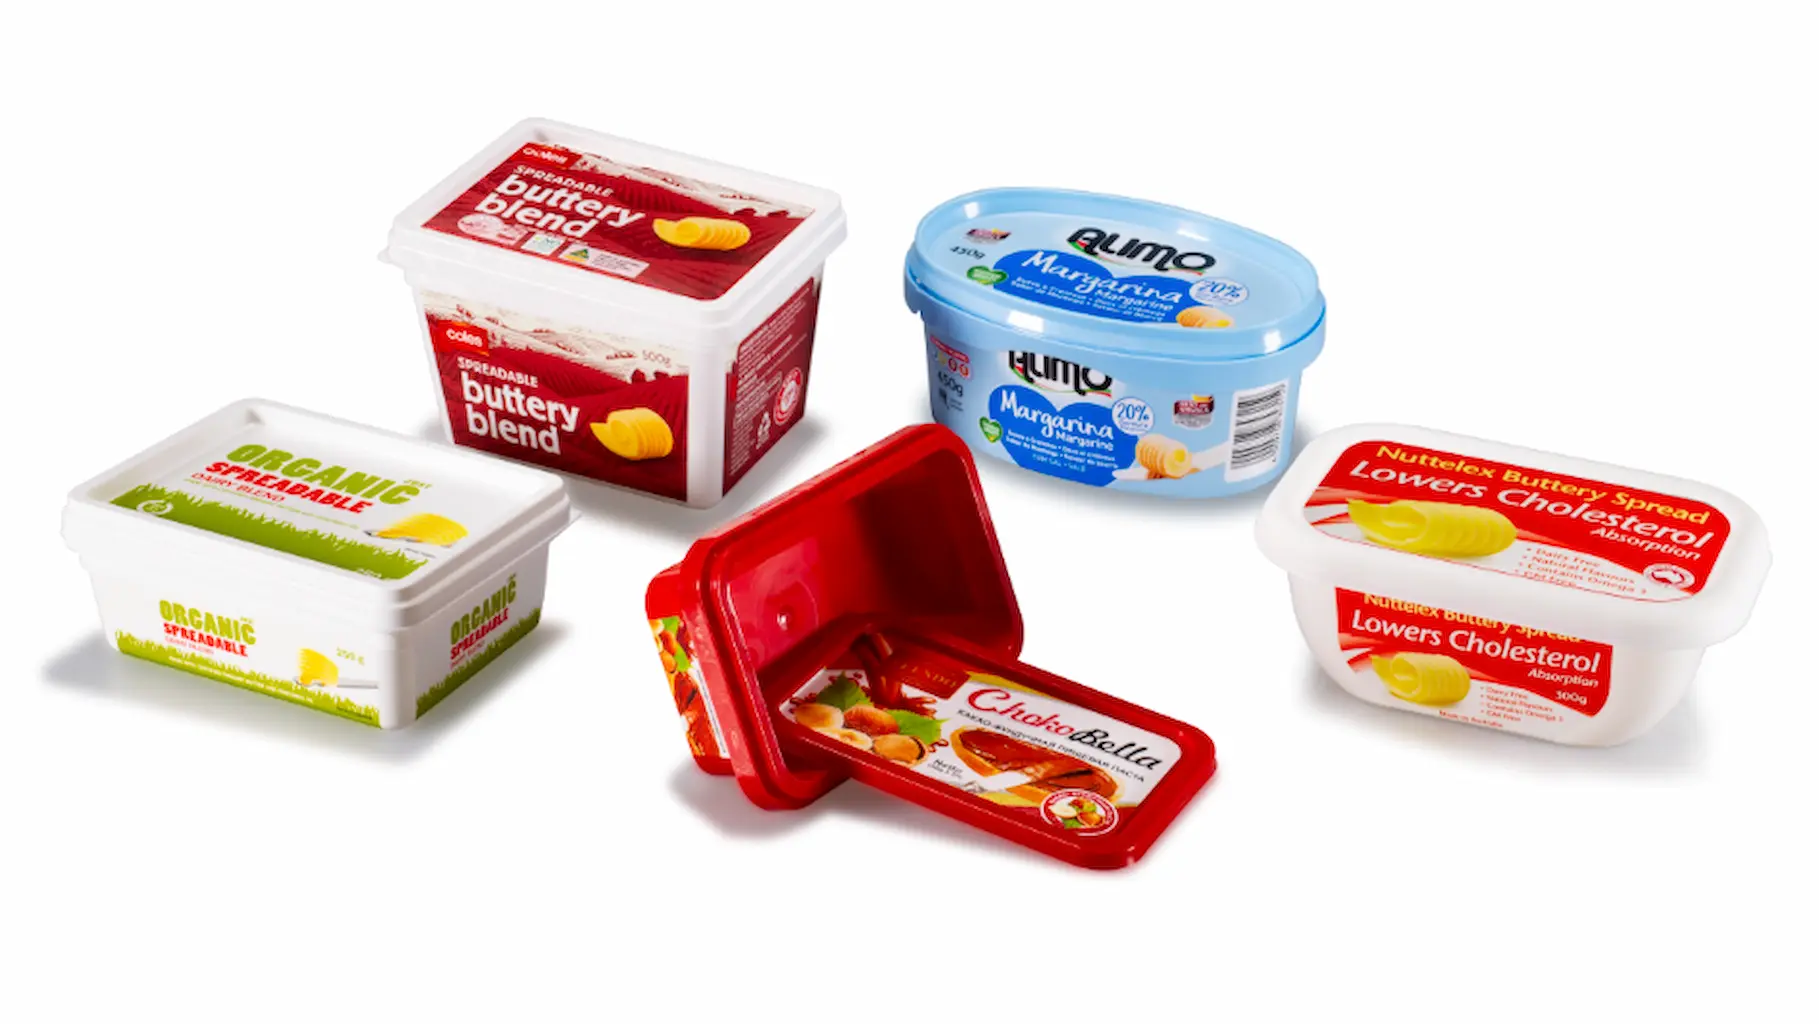 What are plastic margarine containers used for?